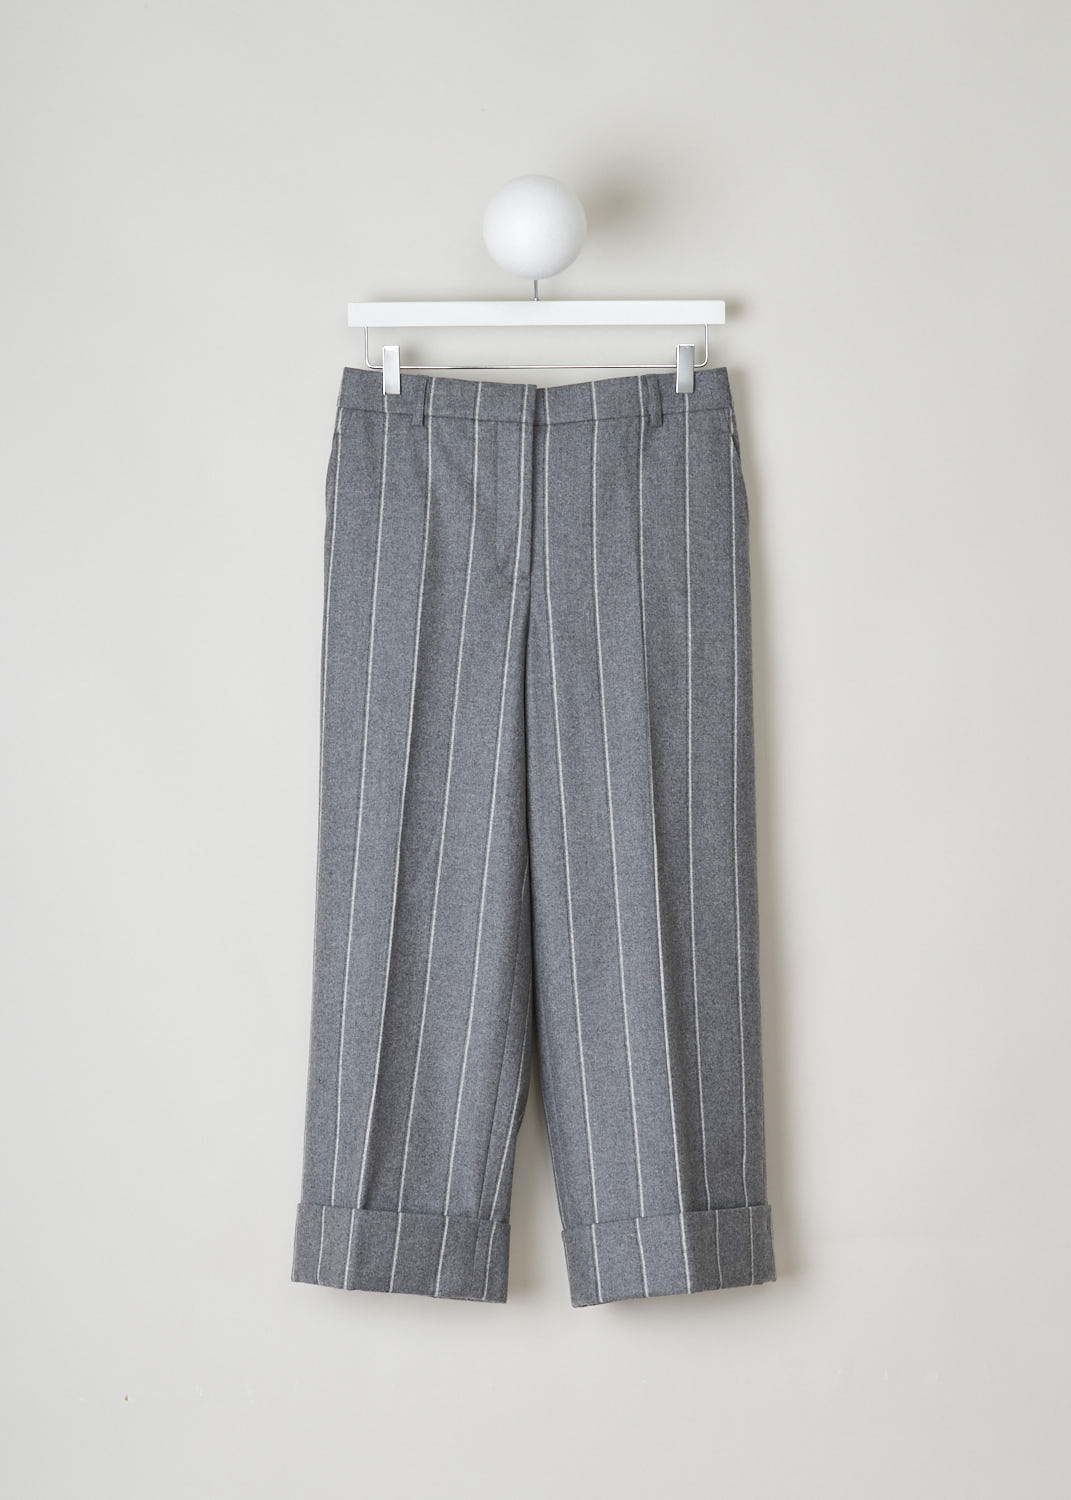 THOM BROWNE, WOOL FLANNEL STRIPED TROUSERS, FTC160A_05019_035_MED_GREY, Grey, Print, Front, These heather grey, striped trousers have belt loops and a clap a zip closure They feature slanted pockets in the front and buttoned welt pockets in the back. The pant legs end in broad, folded hem. 
